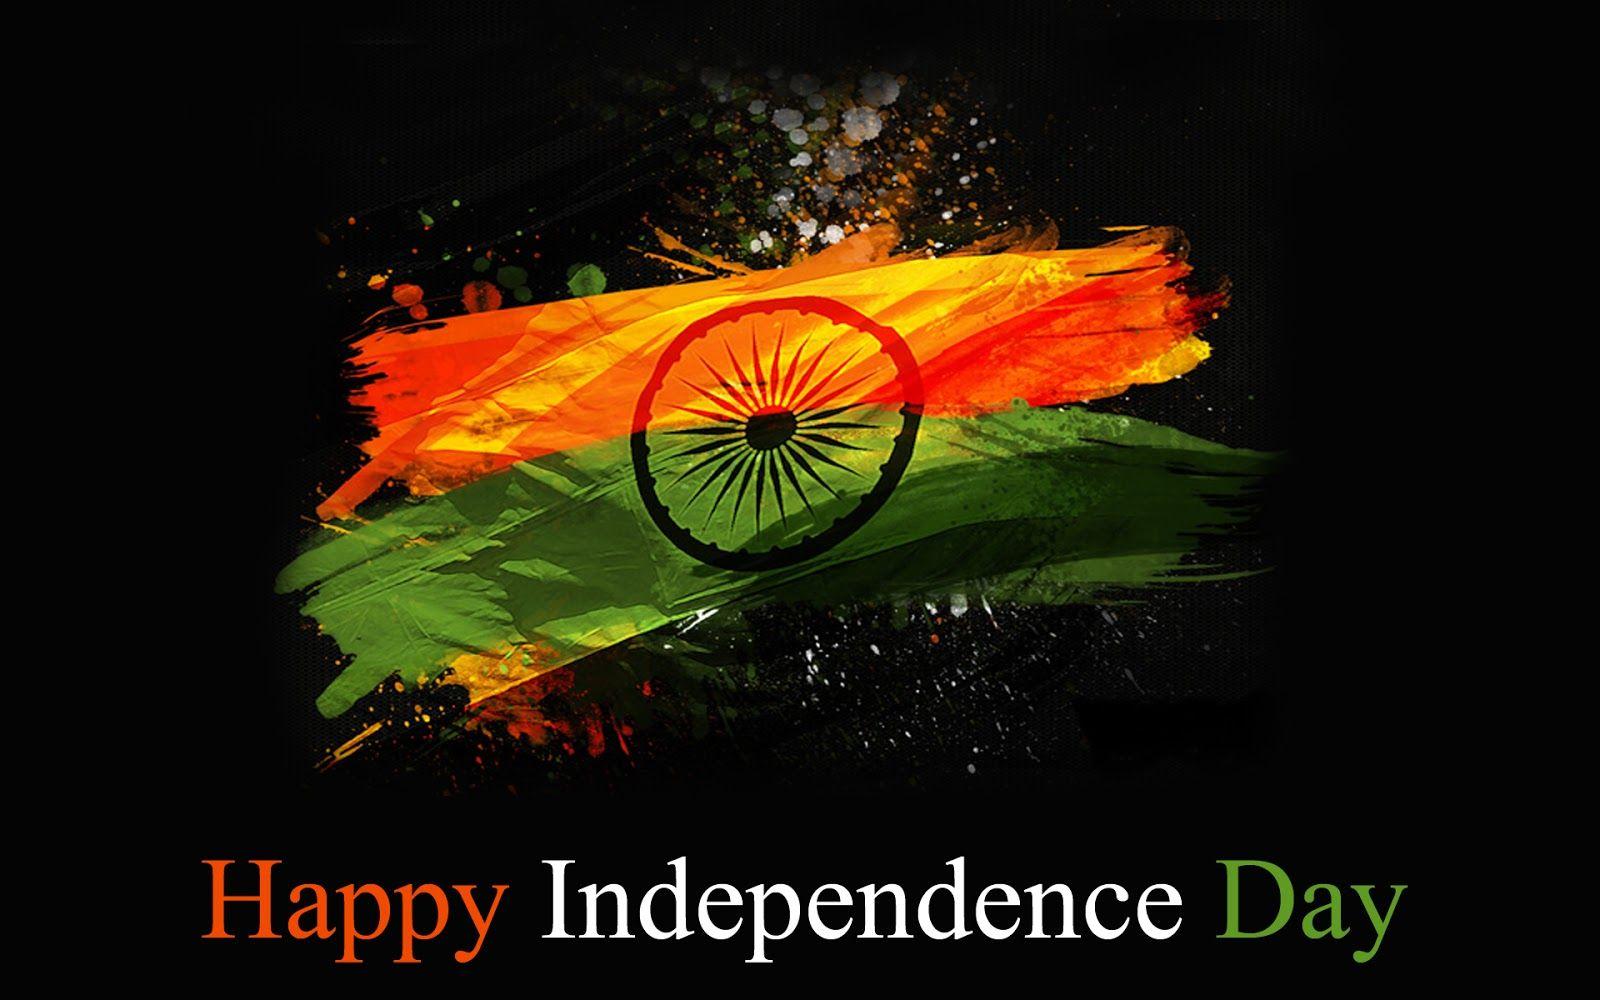 Happy Independence Day 2017 Picture, Wallpaper, HD Image. Happy